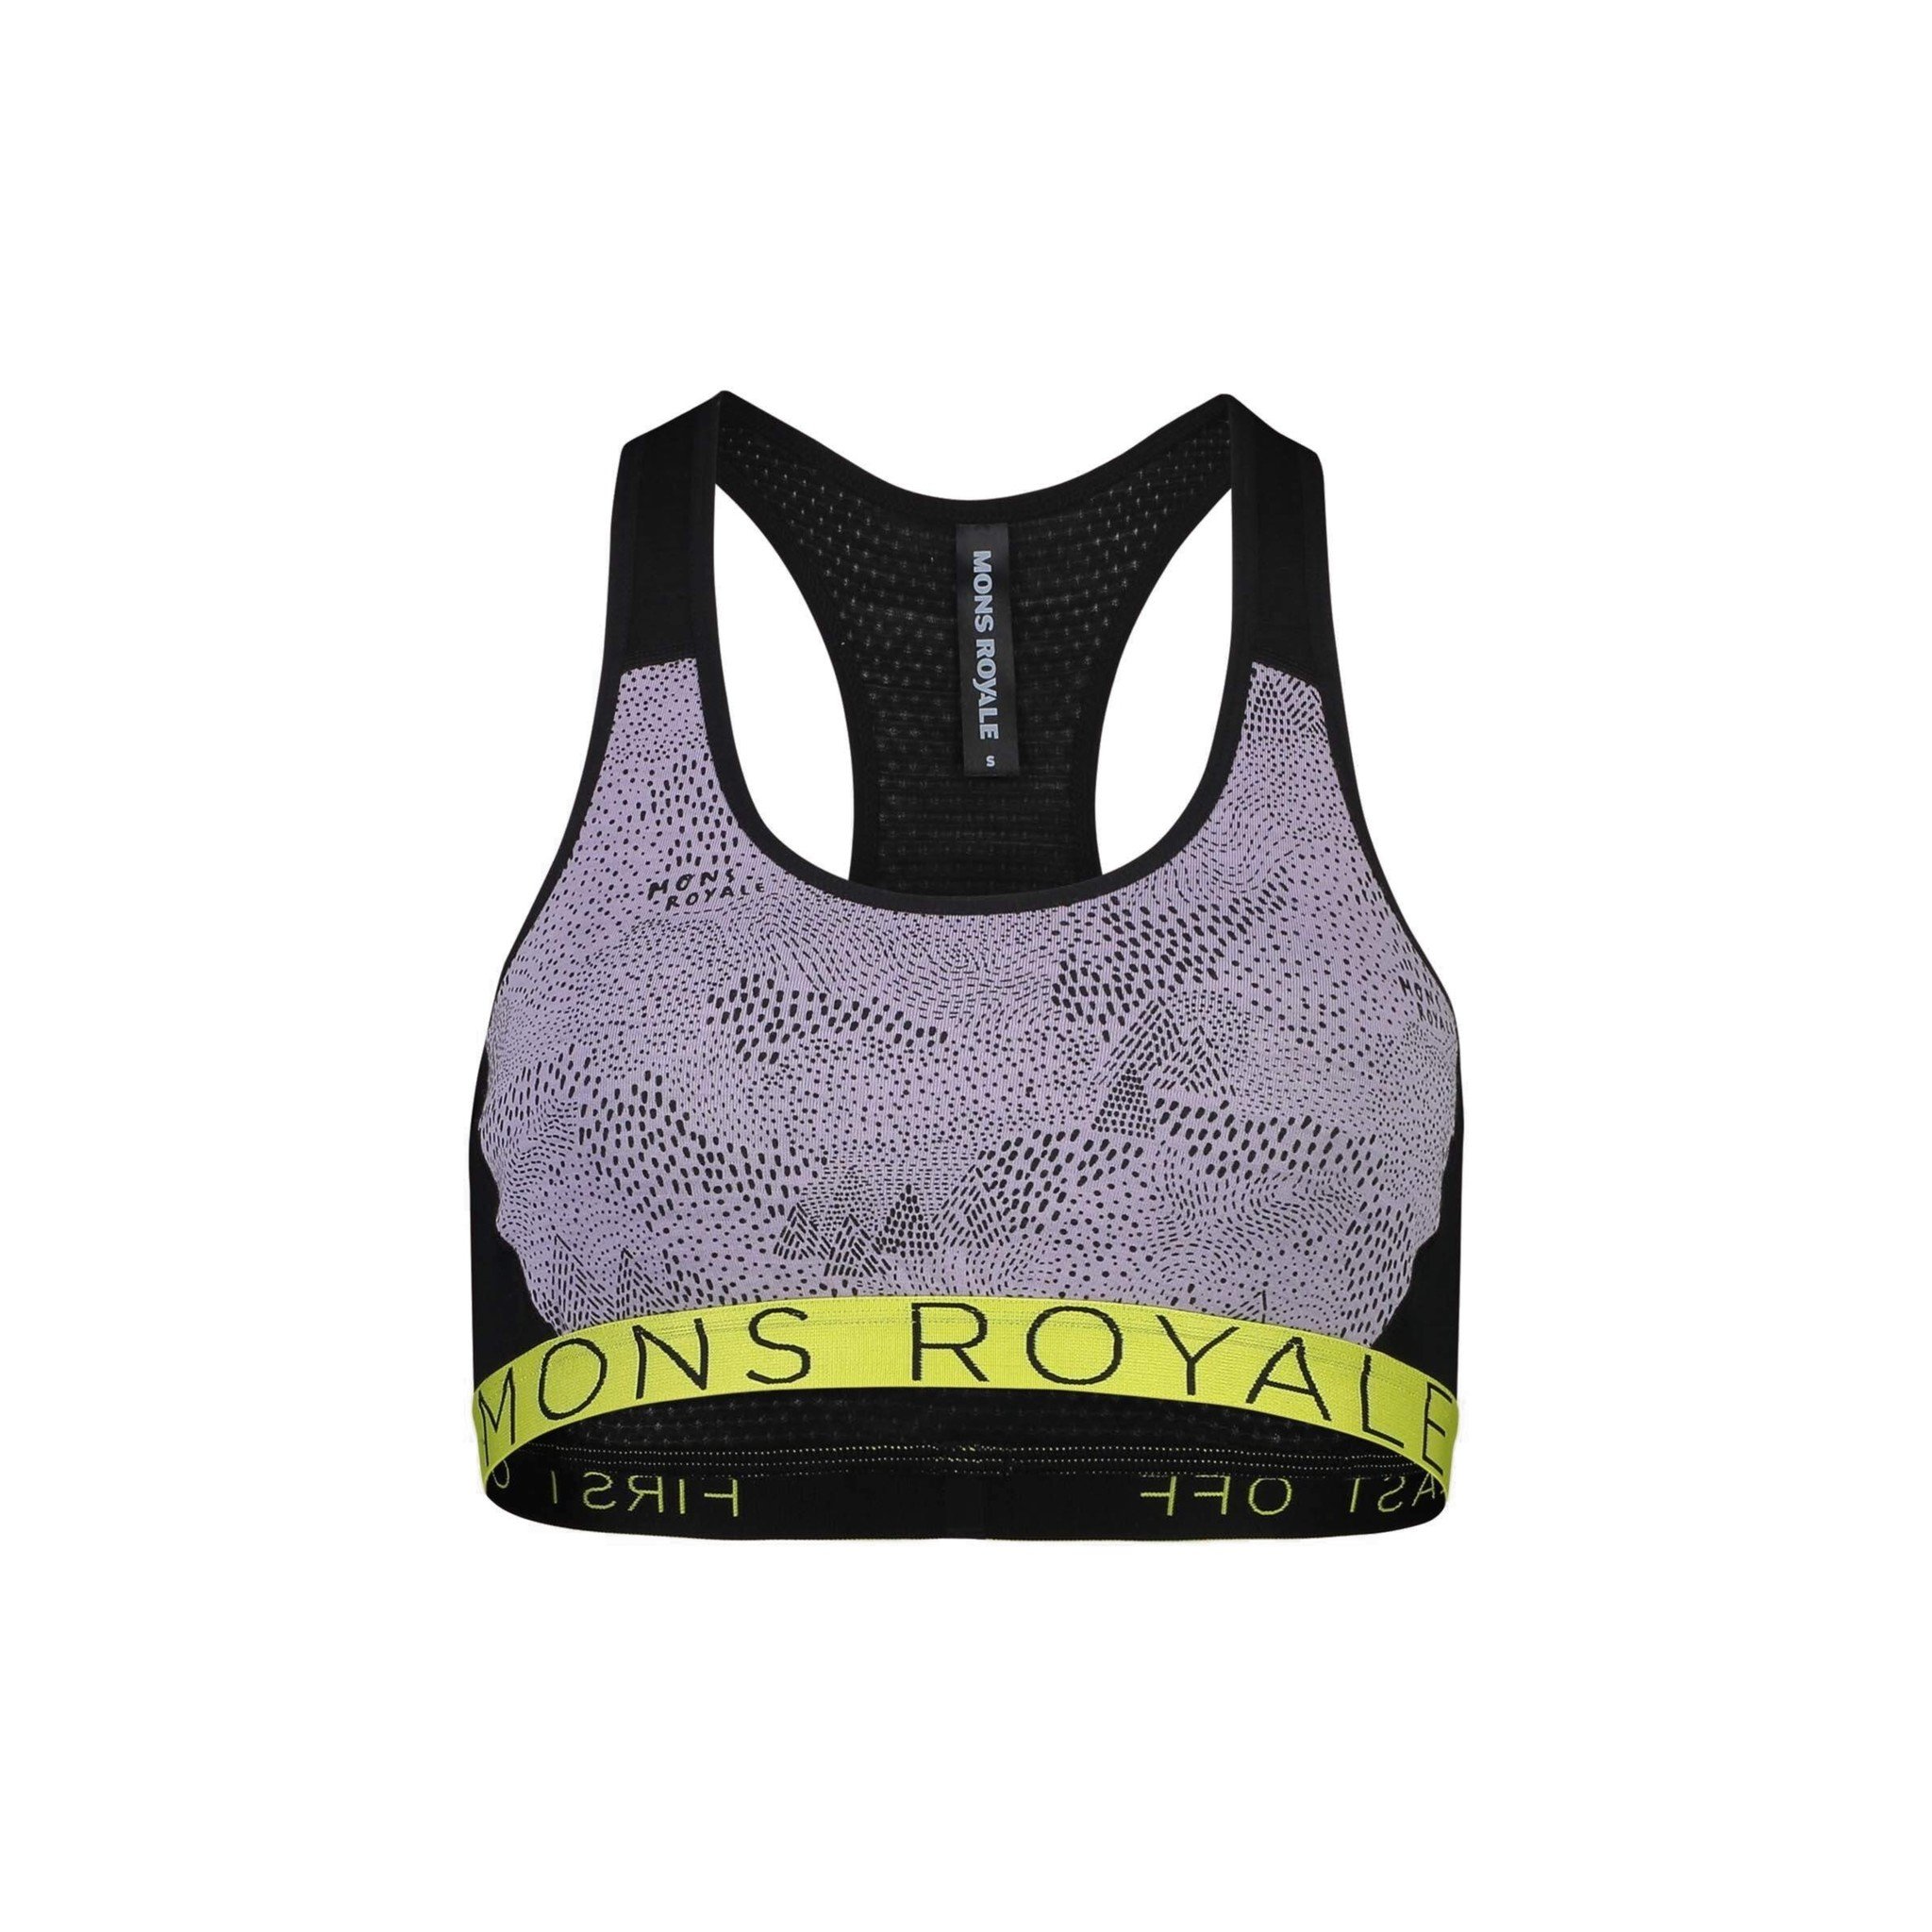 Sports Bras A on Clearance average savings of 63% at Sierra